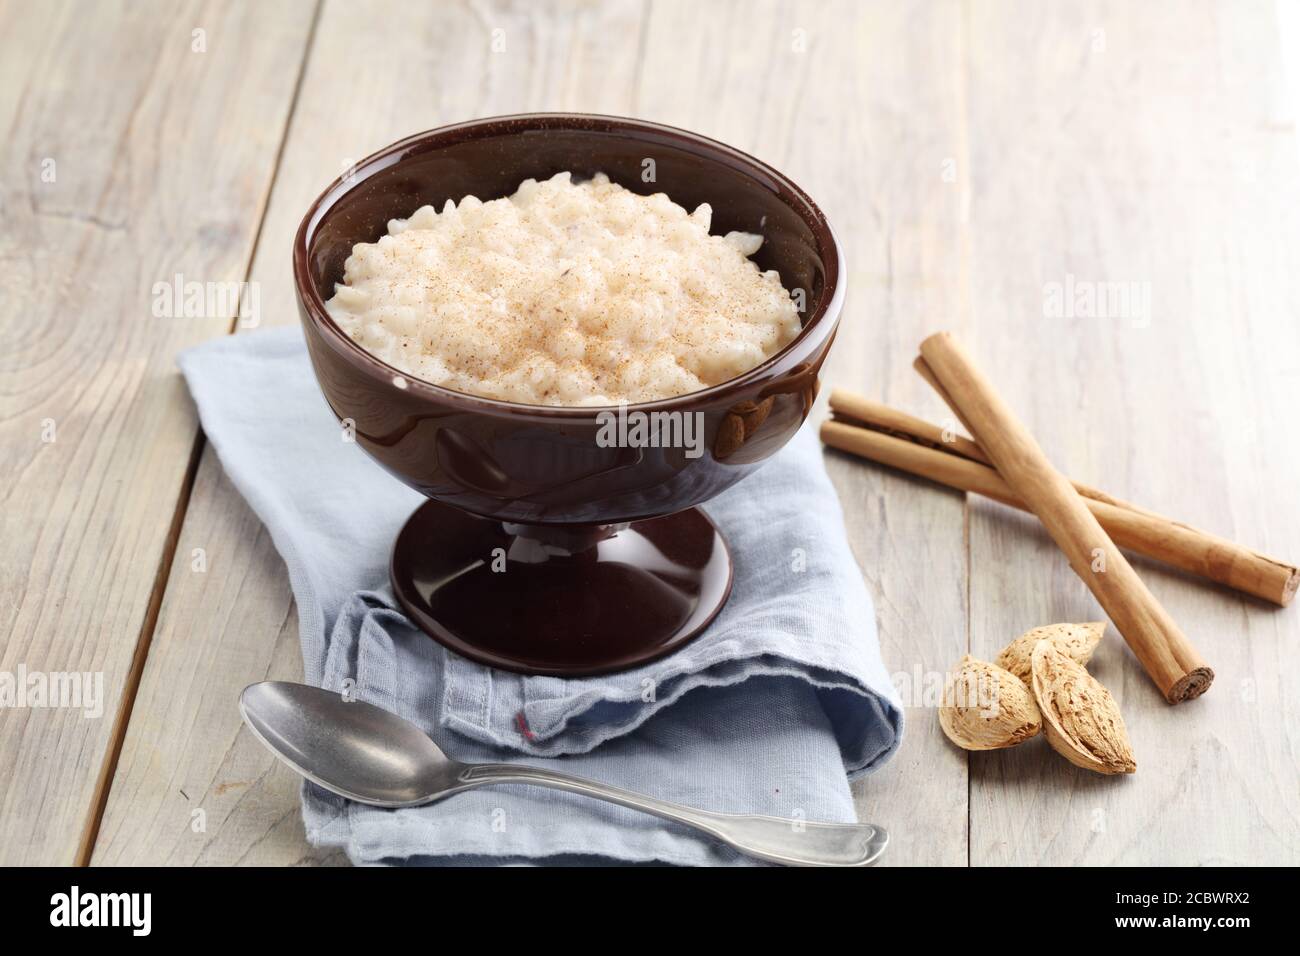 Rice pudding topped with cinnamon powder and almonds Stock Photo